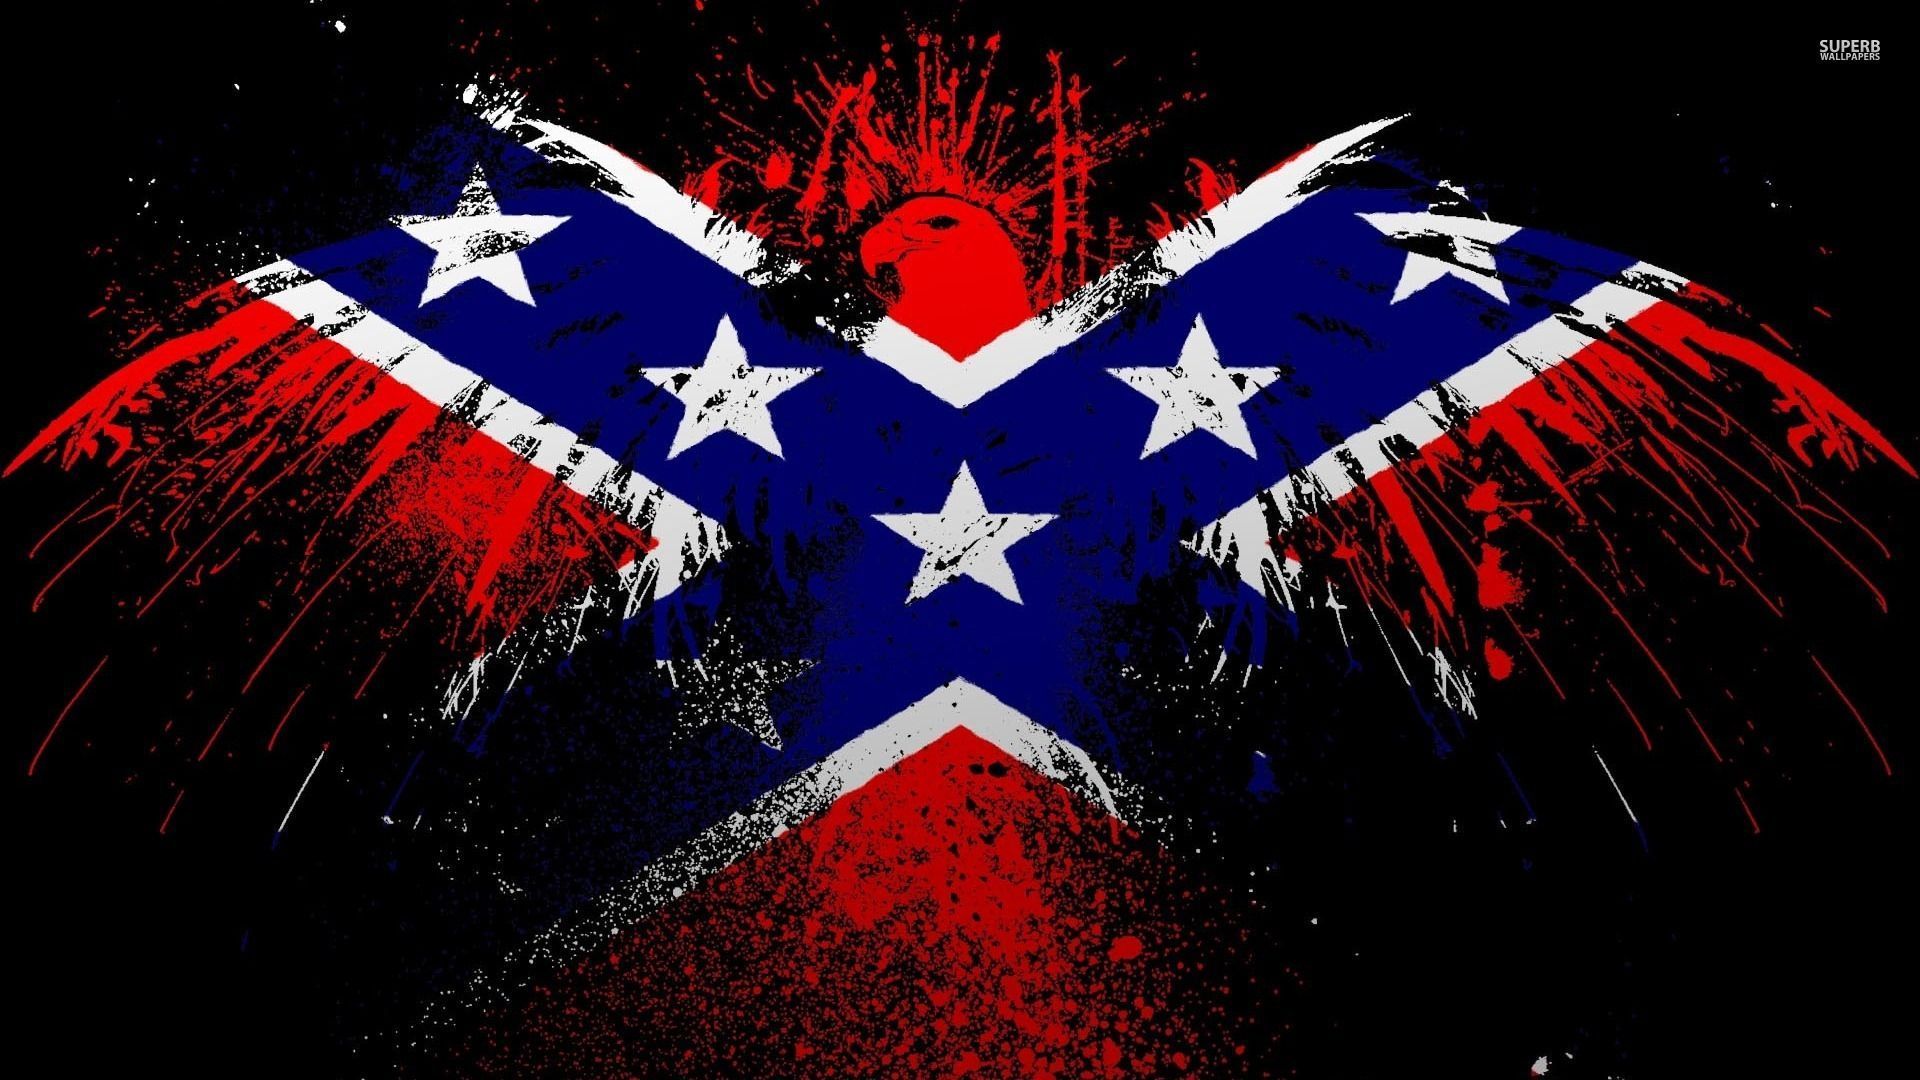 Flags of the Confederate States of America wallpaper - Digital Art